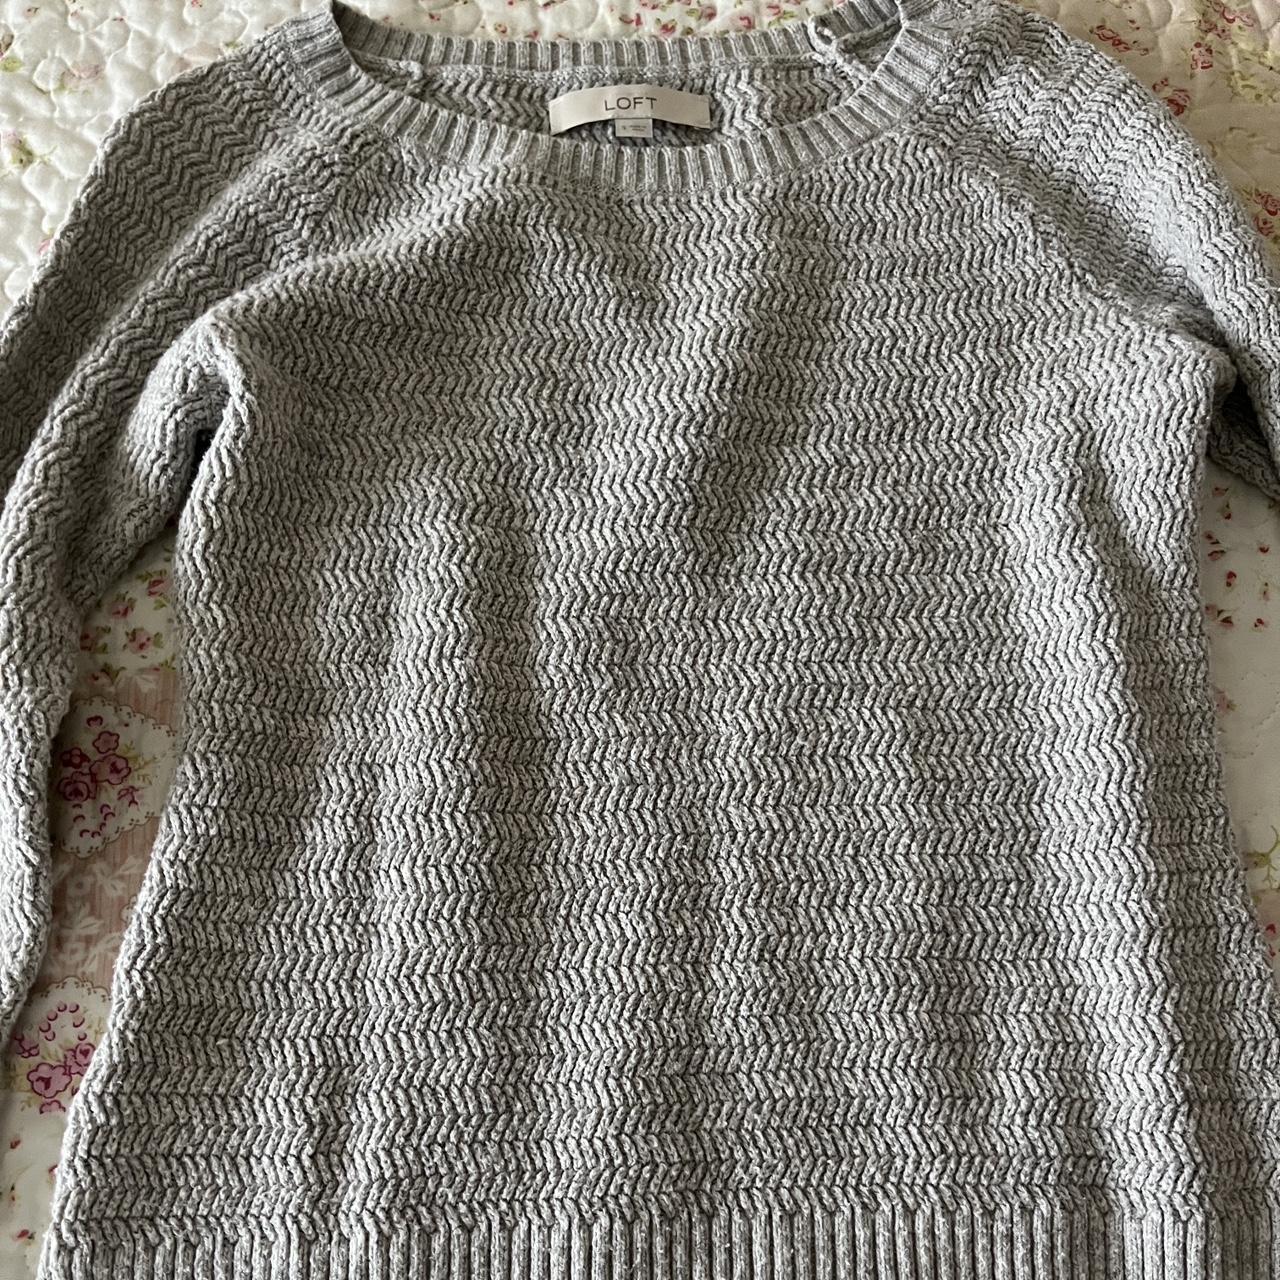 loft knitted sweater grey color size small #loft... - Depop